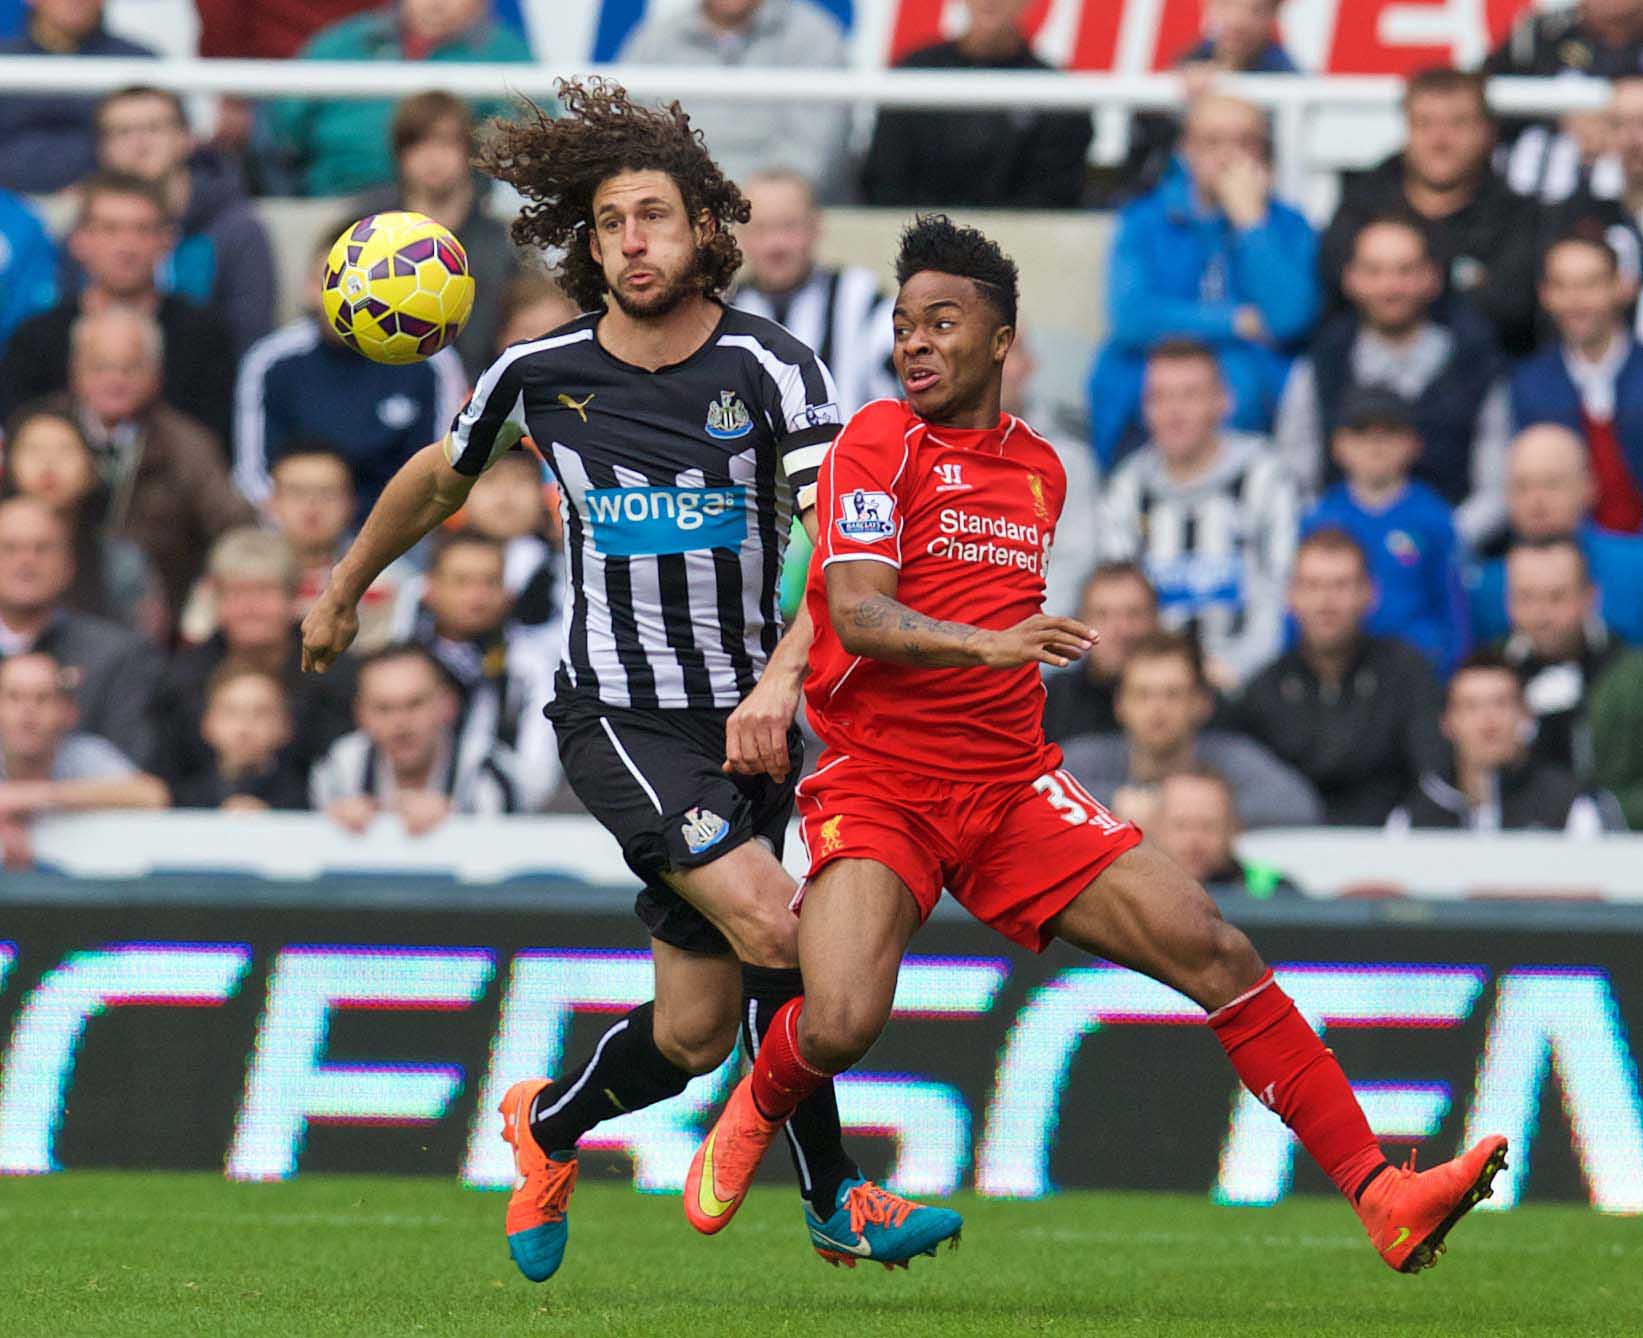 NEIL ATKINSON’S MATCH REVIEW: NEWCASTLE UNITED 1 LIVERPOOL 0